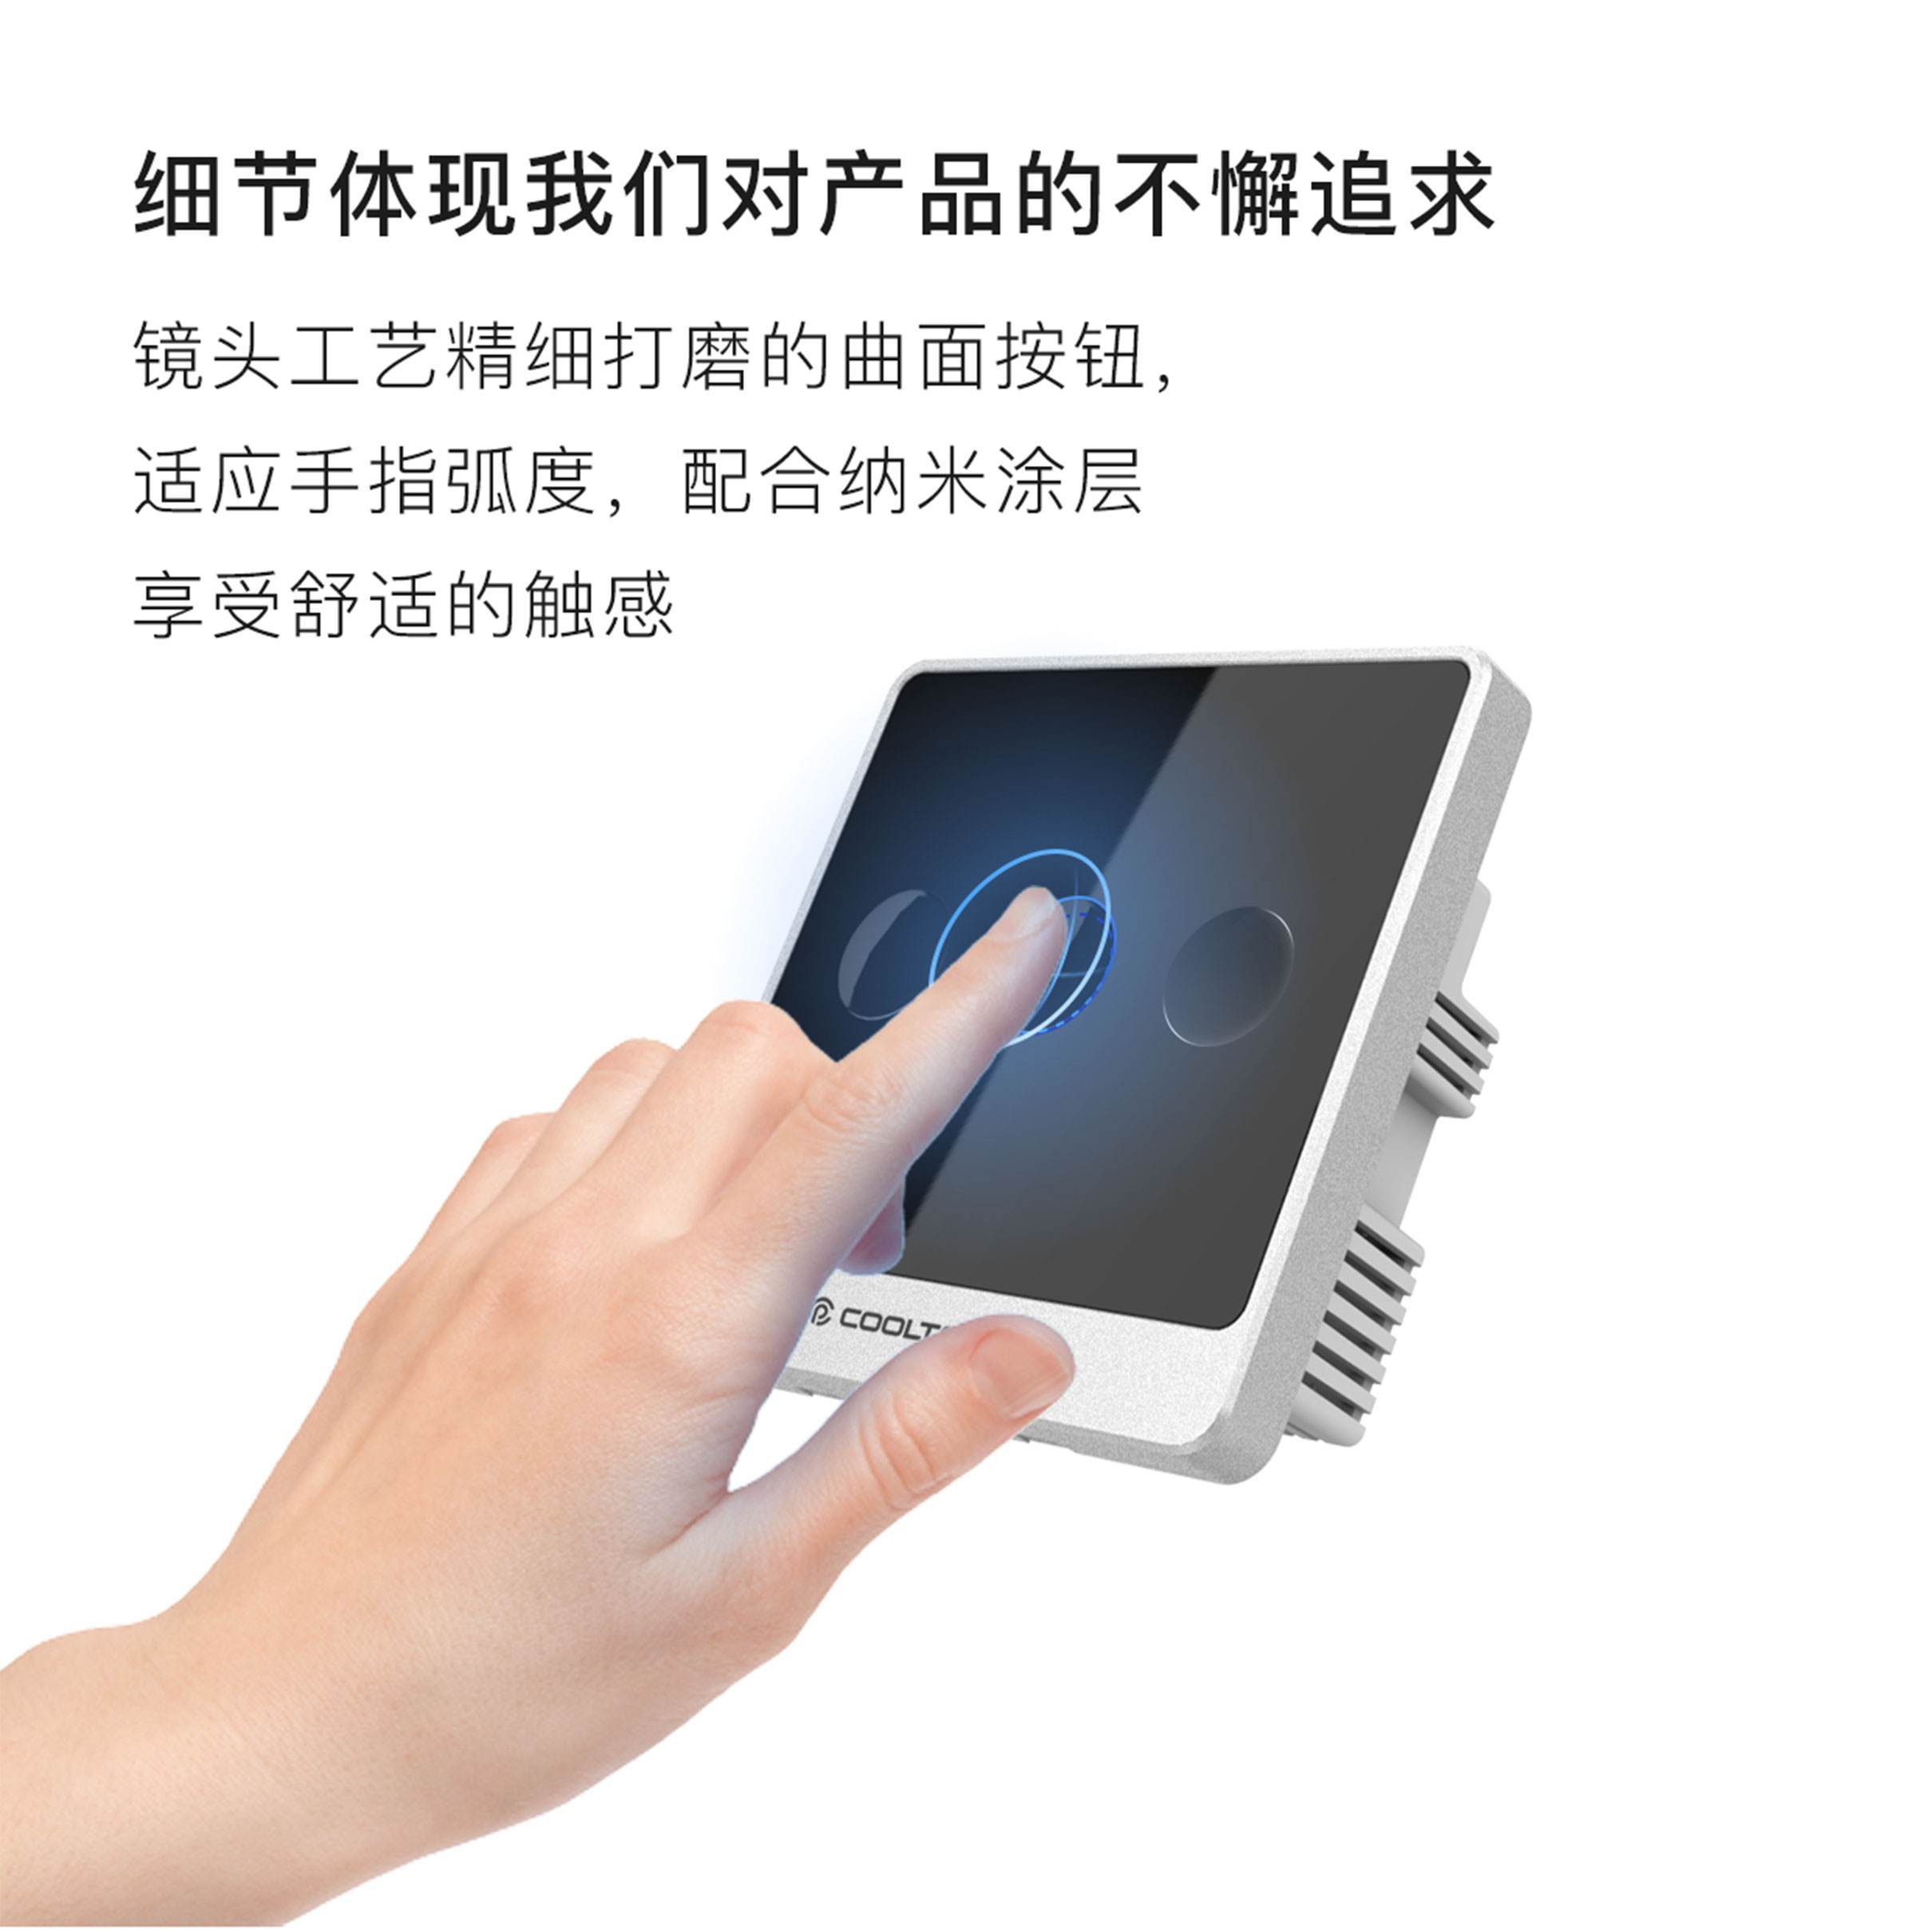 CoolTouch COOLTOUCH智能开关自带人体感应豪华单火开关 面板开关